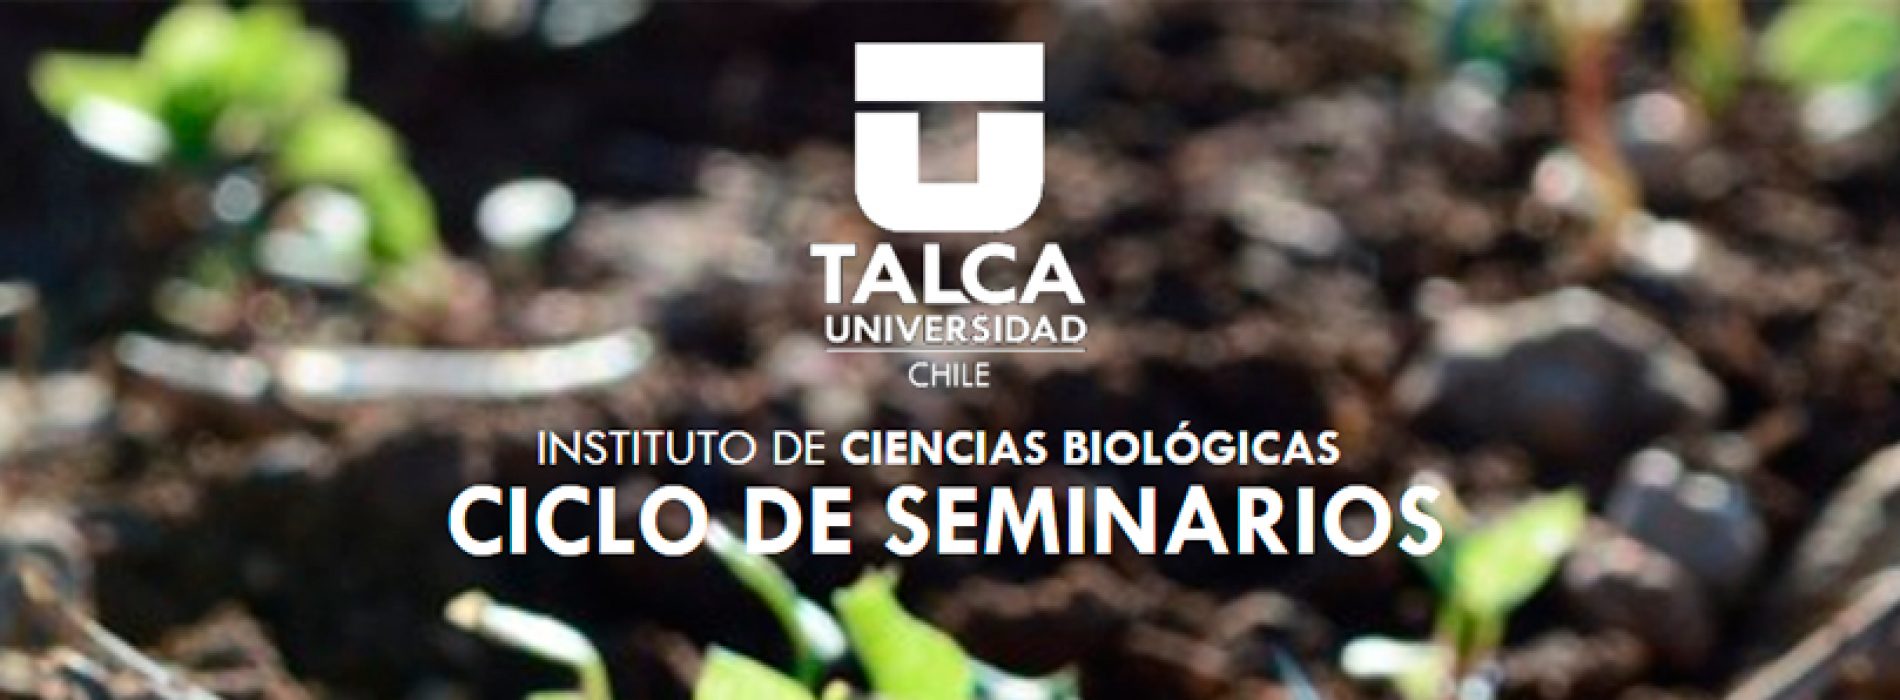 Lecture: "Enzymes of how soil indicators of environmental disturbance in ecosystems of cold weather"